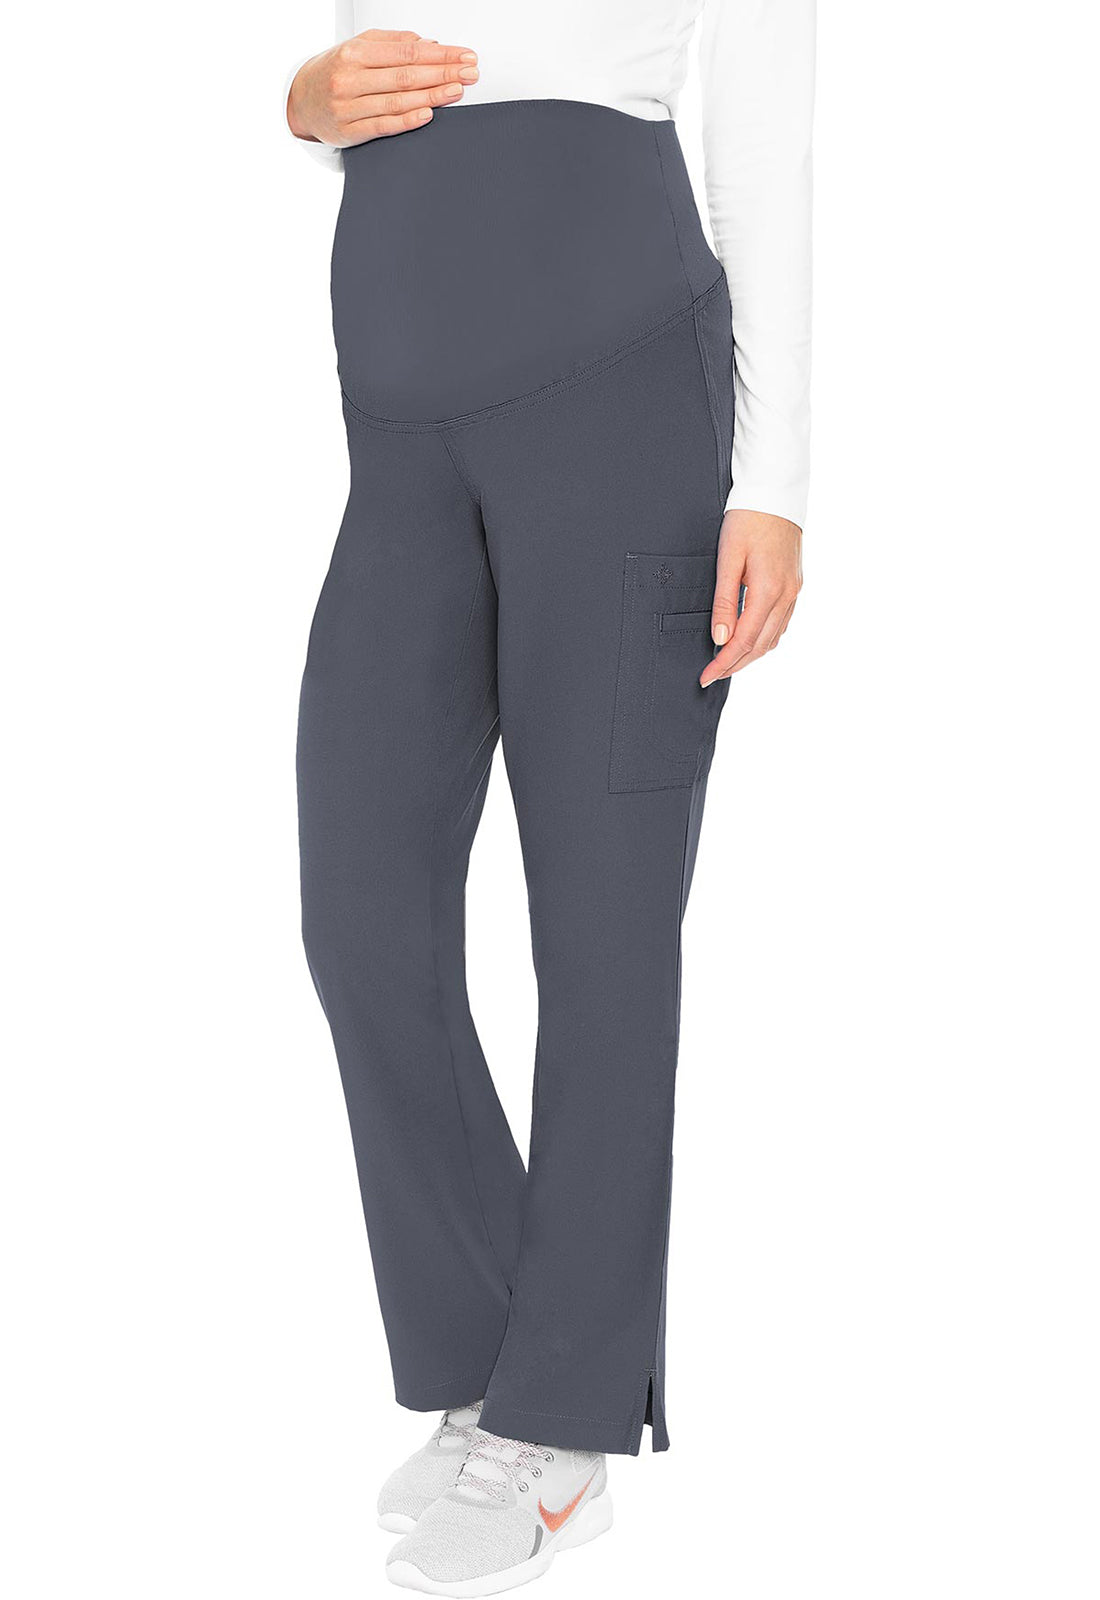 Med Couture Activate 8727 Maternity Pant Pewter